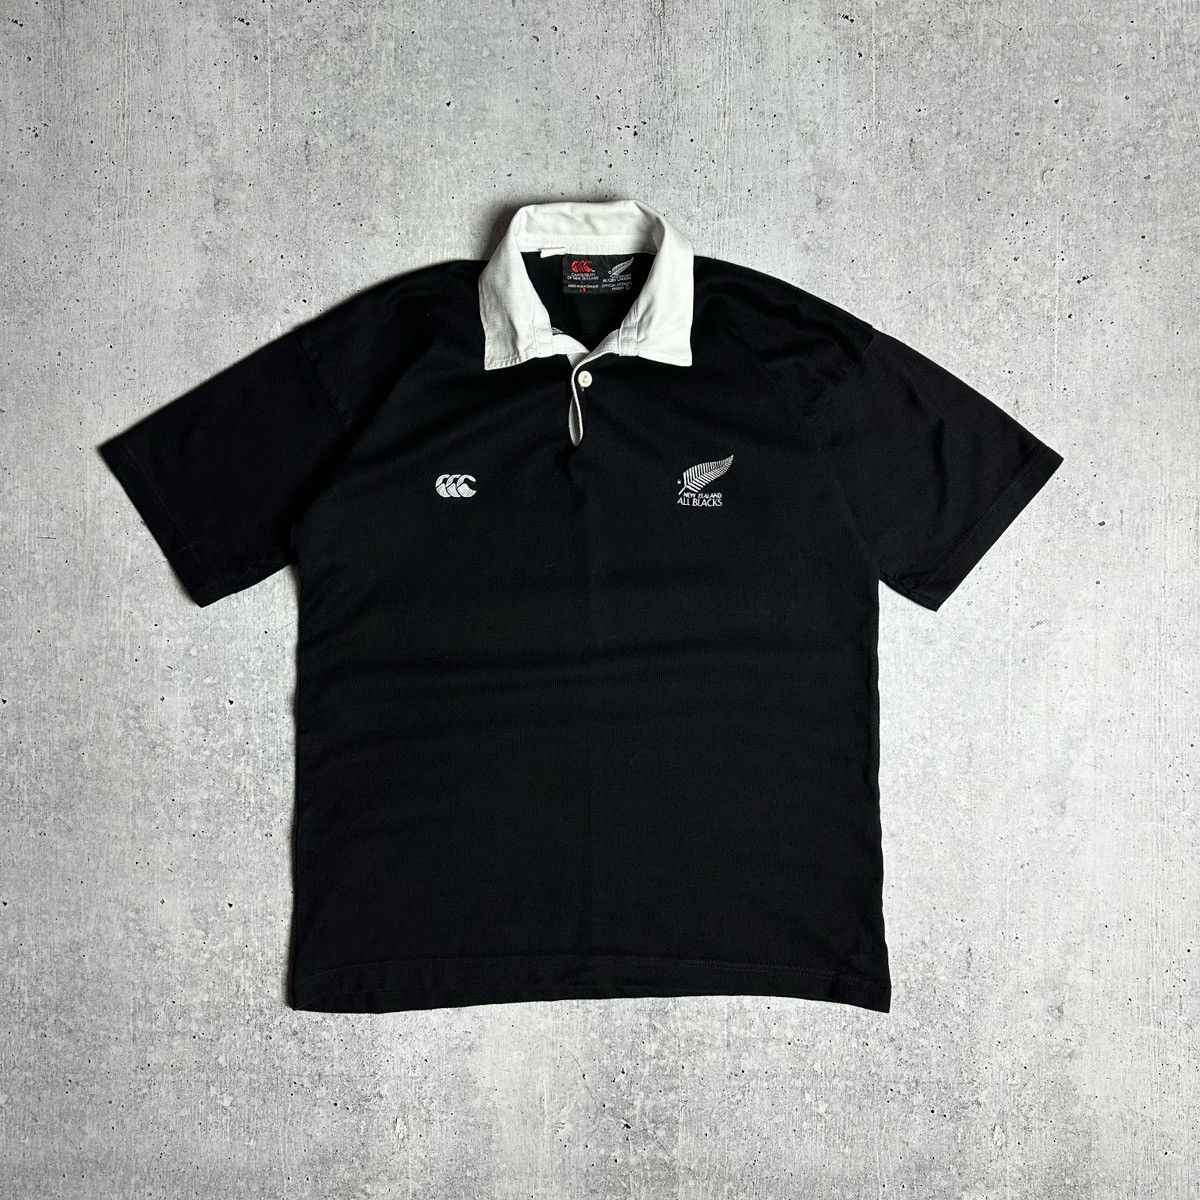 Canterbury All Black Rugby Jersey | Grailed